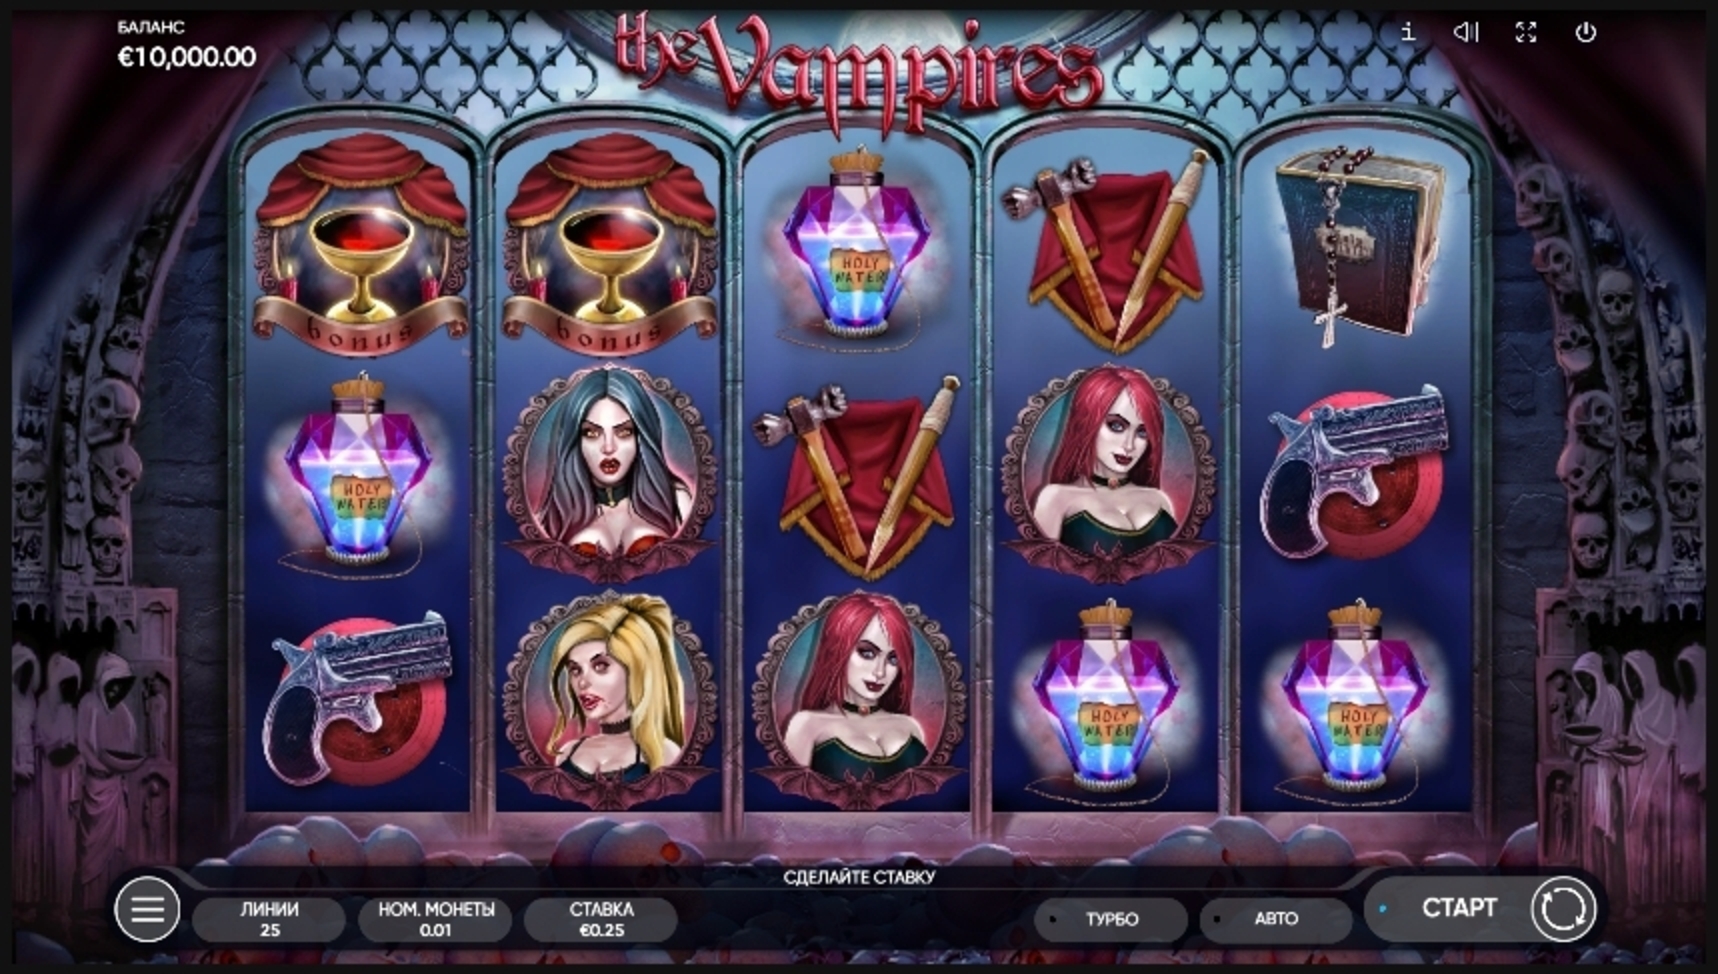 Reels in The Vampires Slot Game by Endorphina